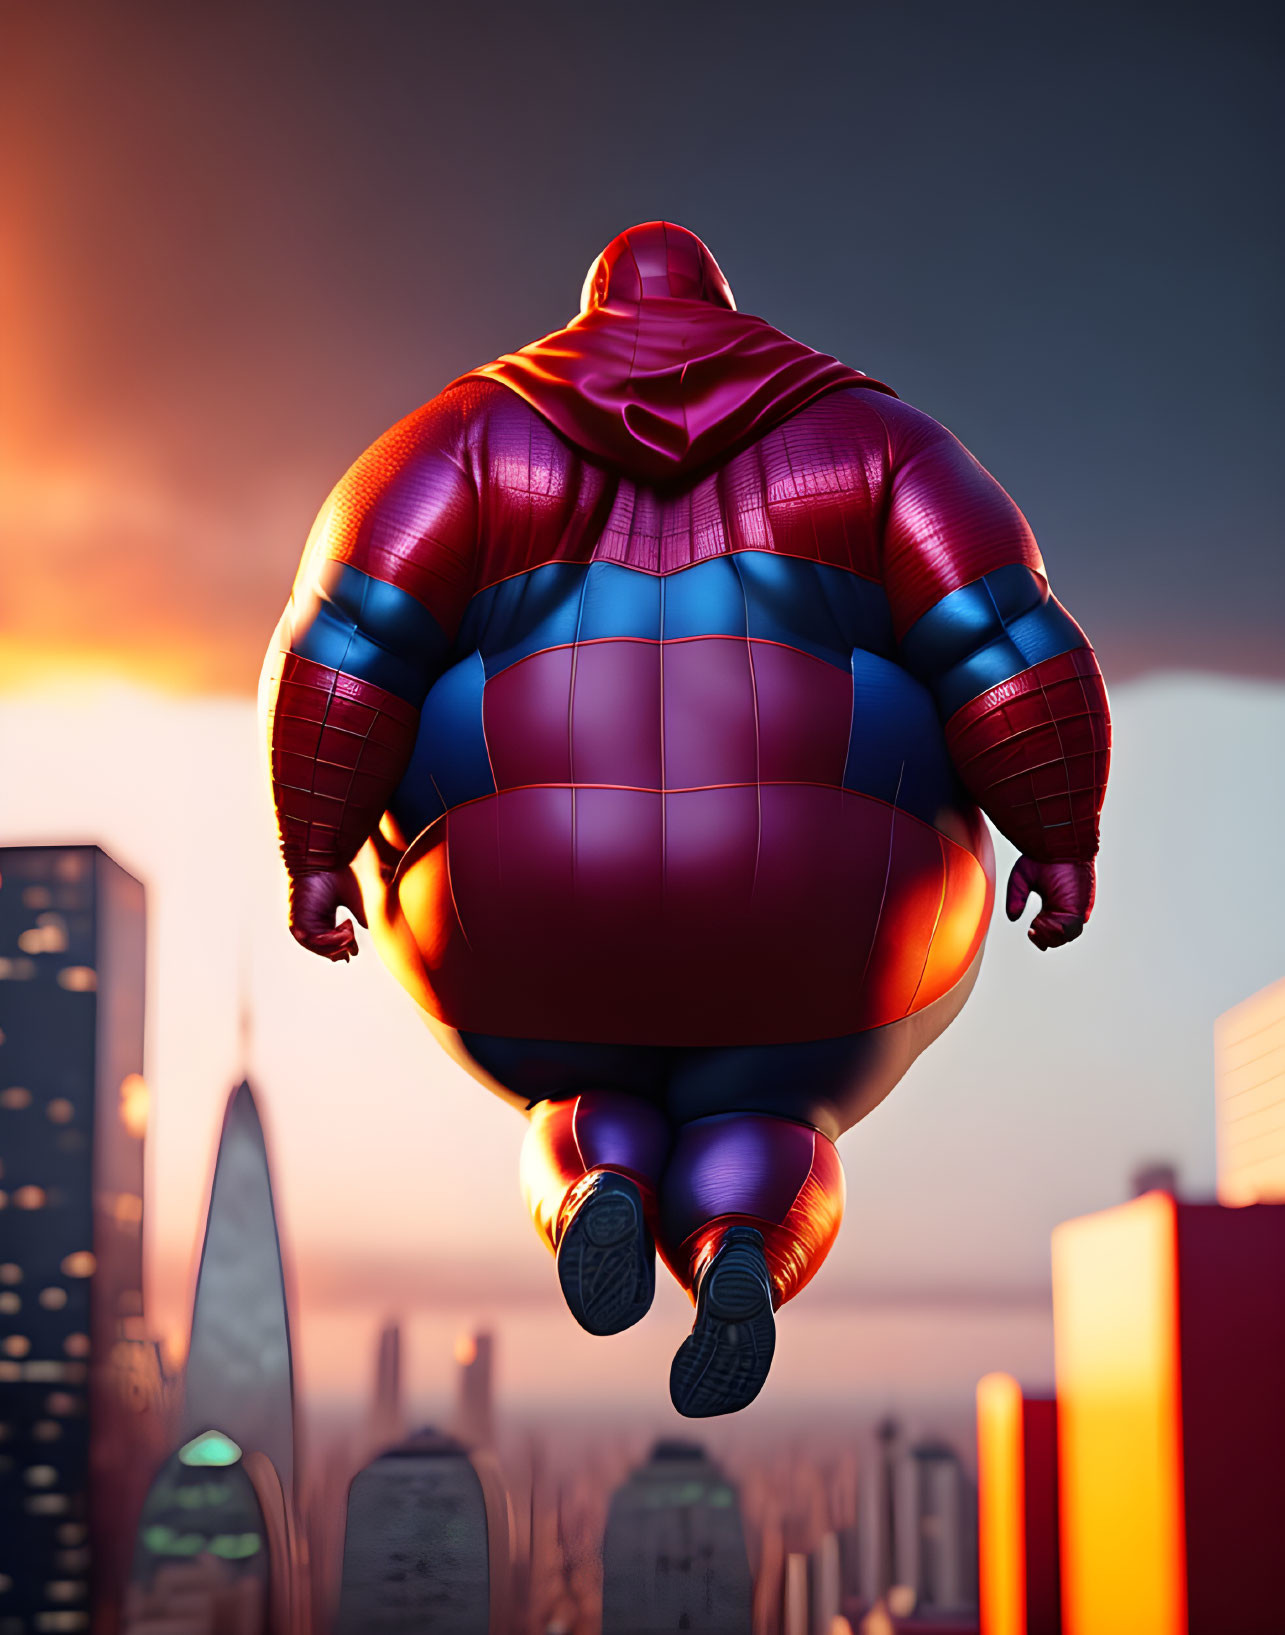 Giant Inflatable Robot Character Over City at Dusk